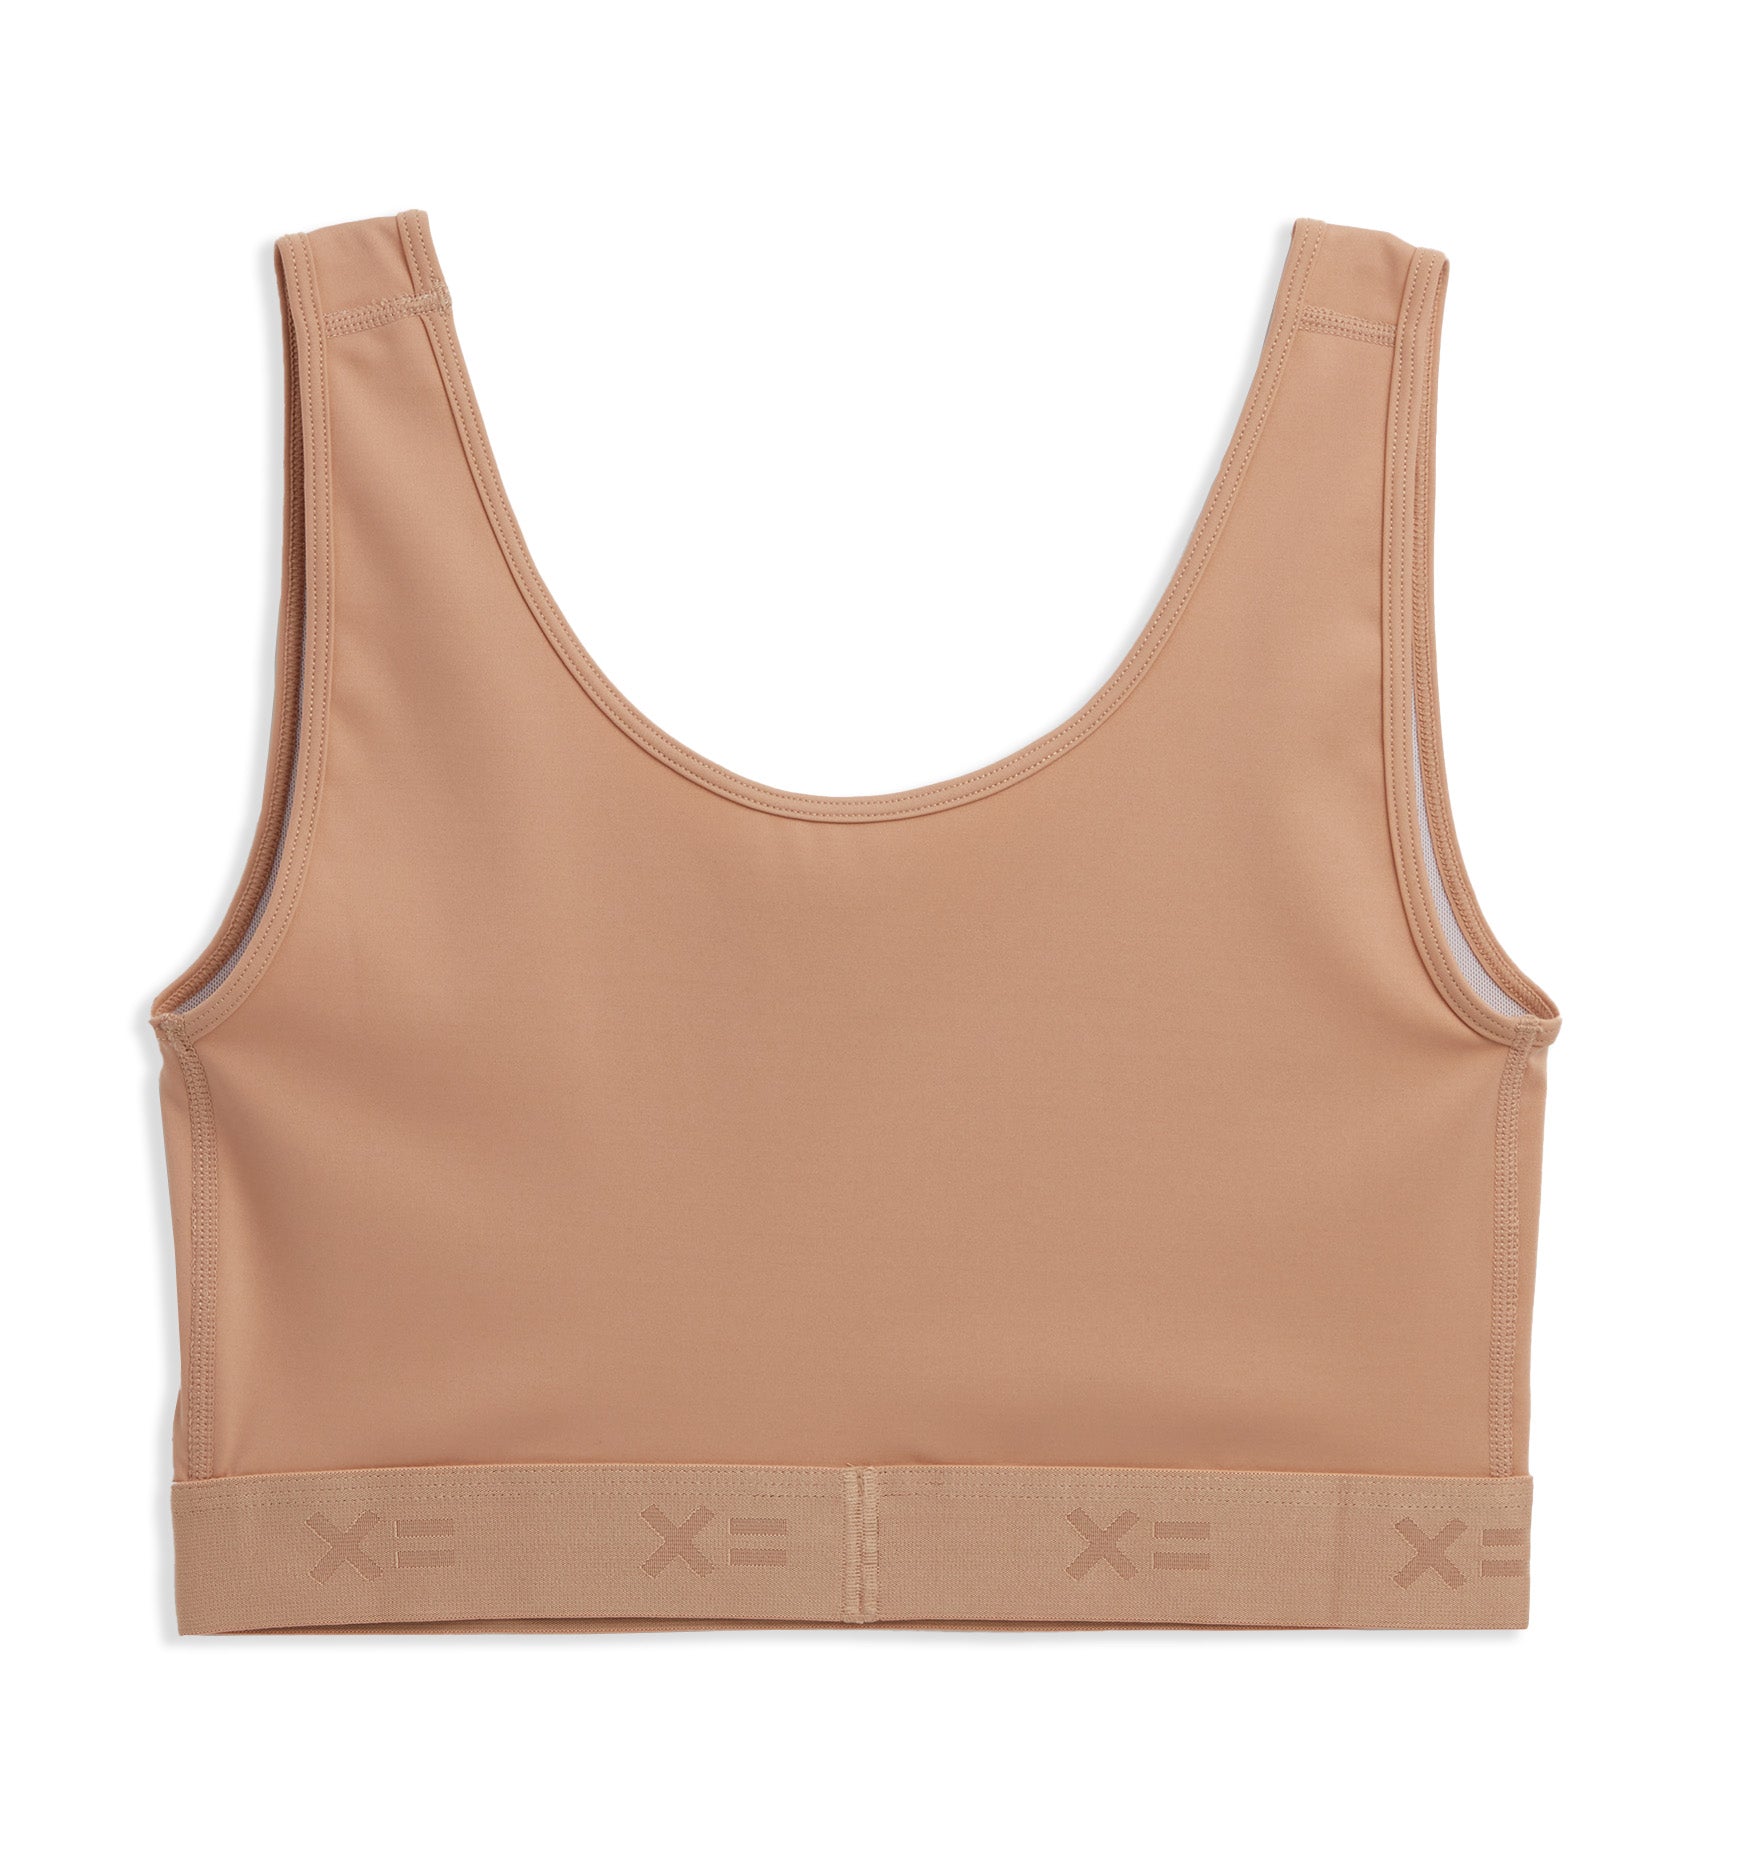 Review for TomboyX Compression Tops 